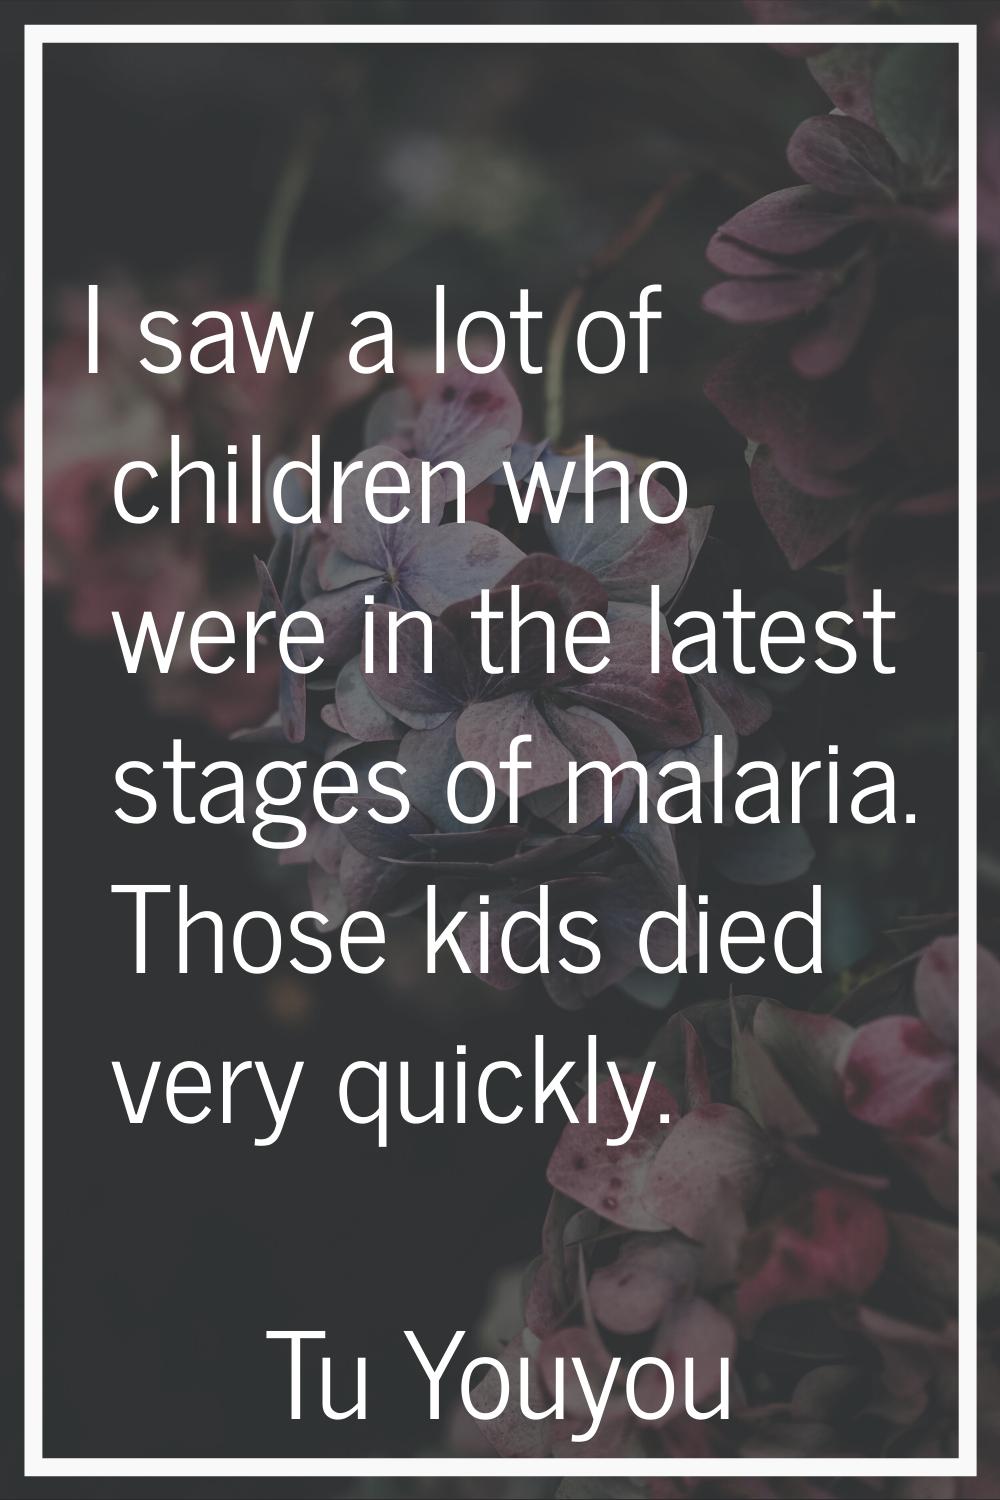 I saw a lot of children who were in the latest stages of malaria. Those kids died very quickly.